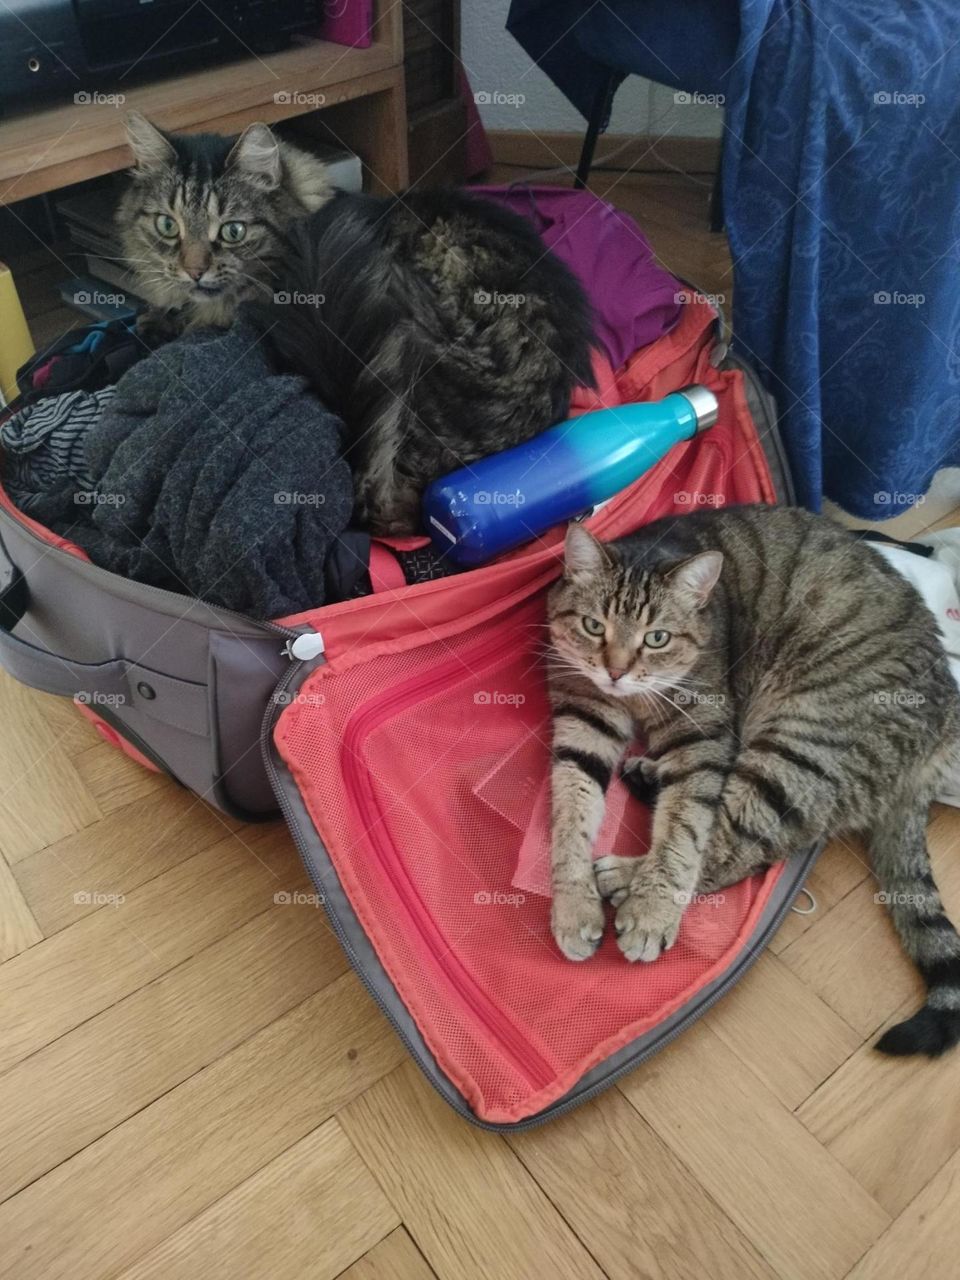 Travel with cats